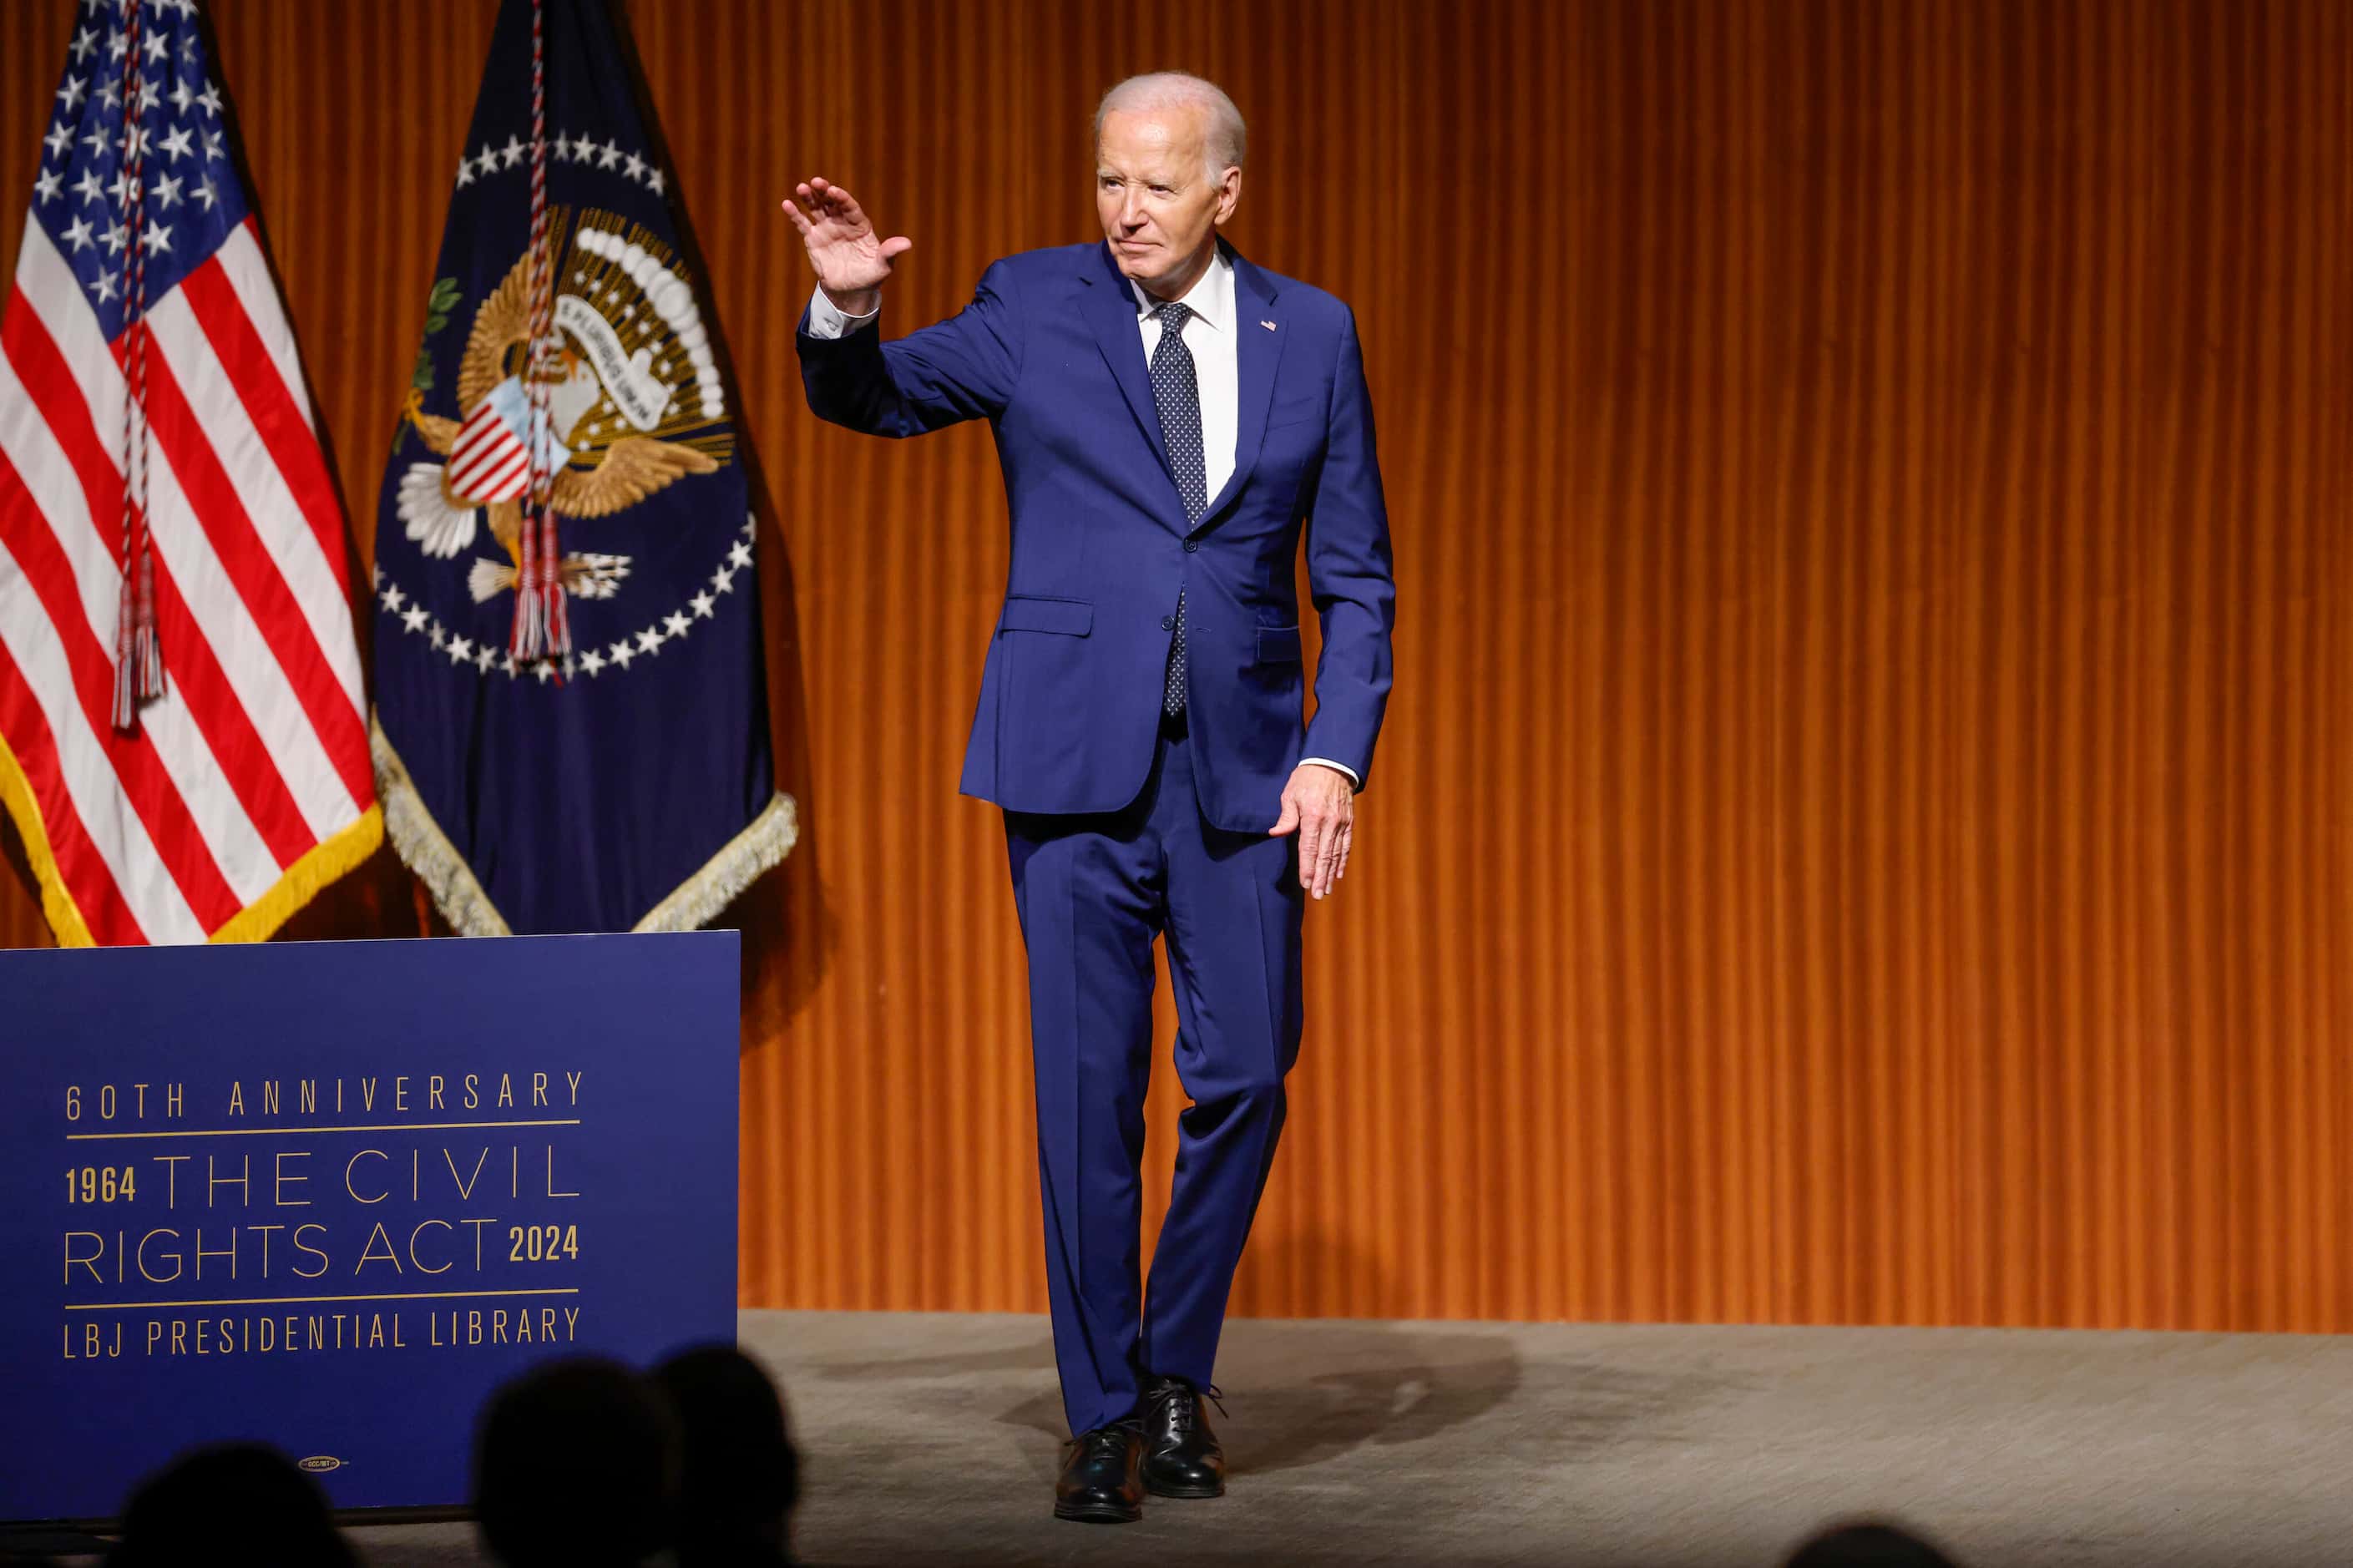 President Joe Biden waves after giving the keynote address during an event commemorating the...